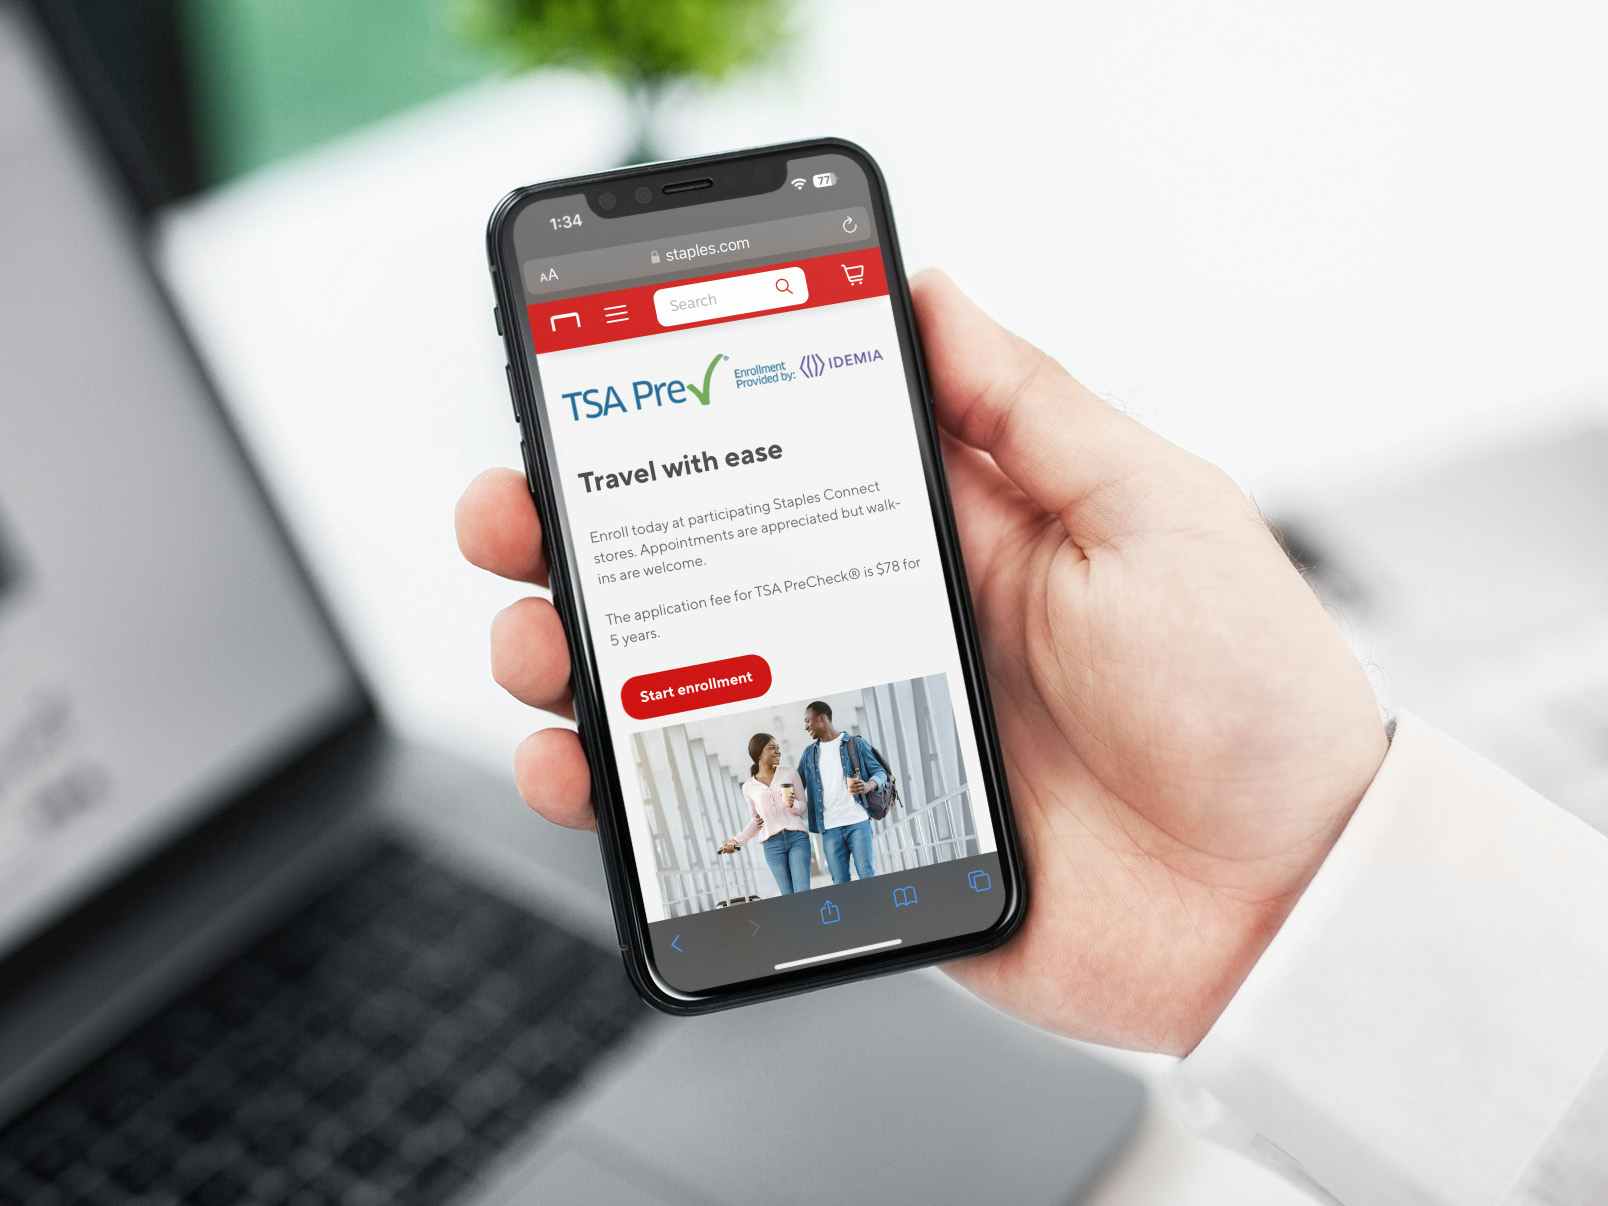 Someone holding a phone displaying the webpage on Staples.com about TSA Precheck enrollment